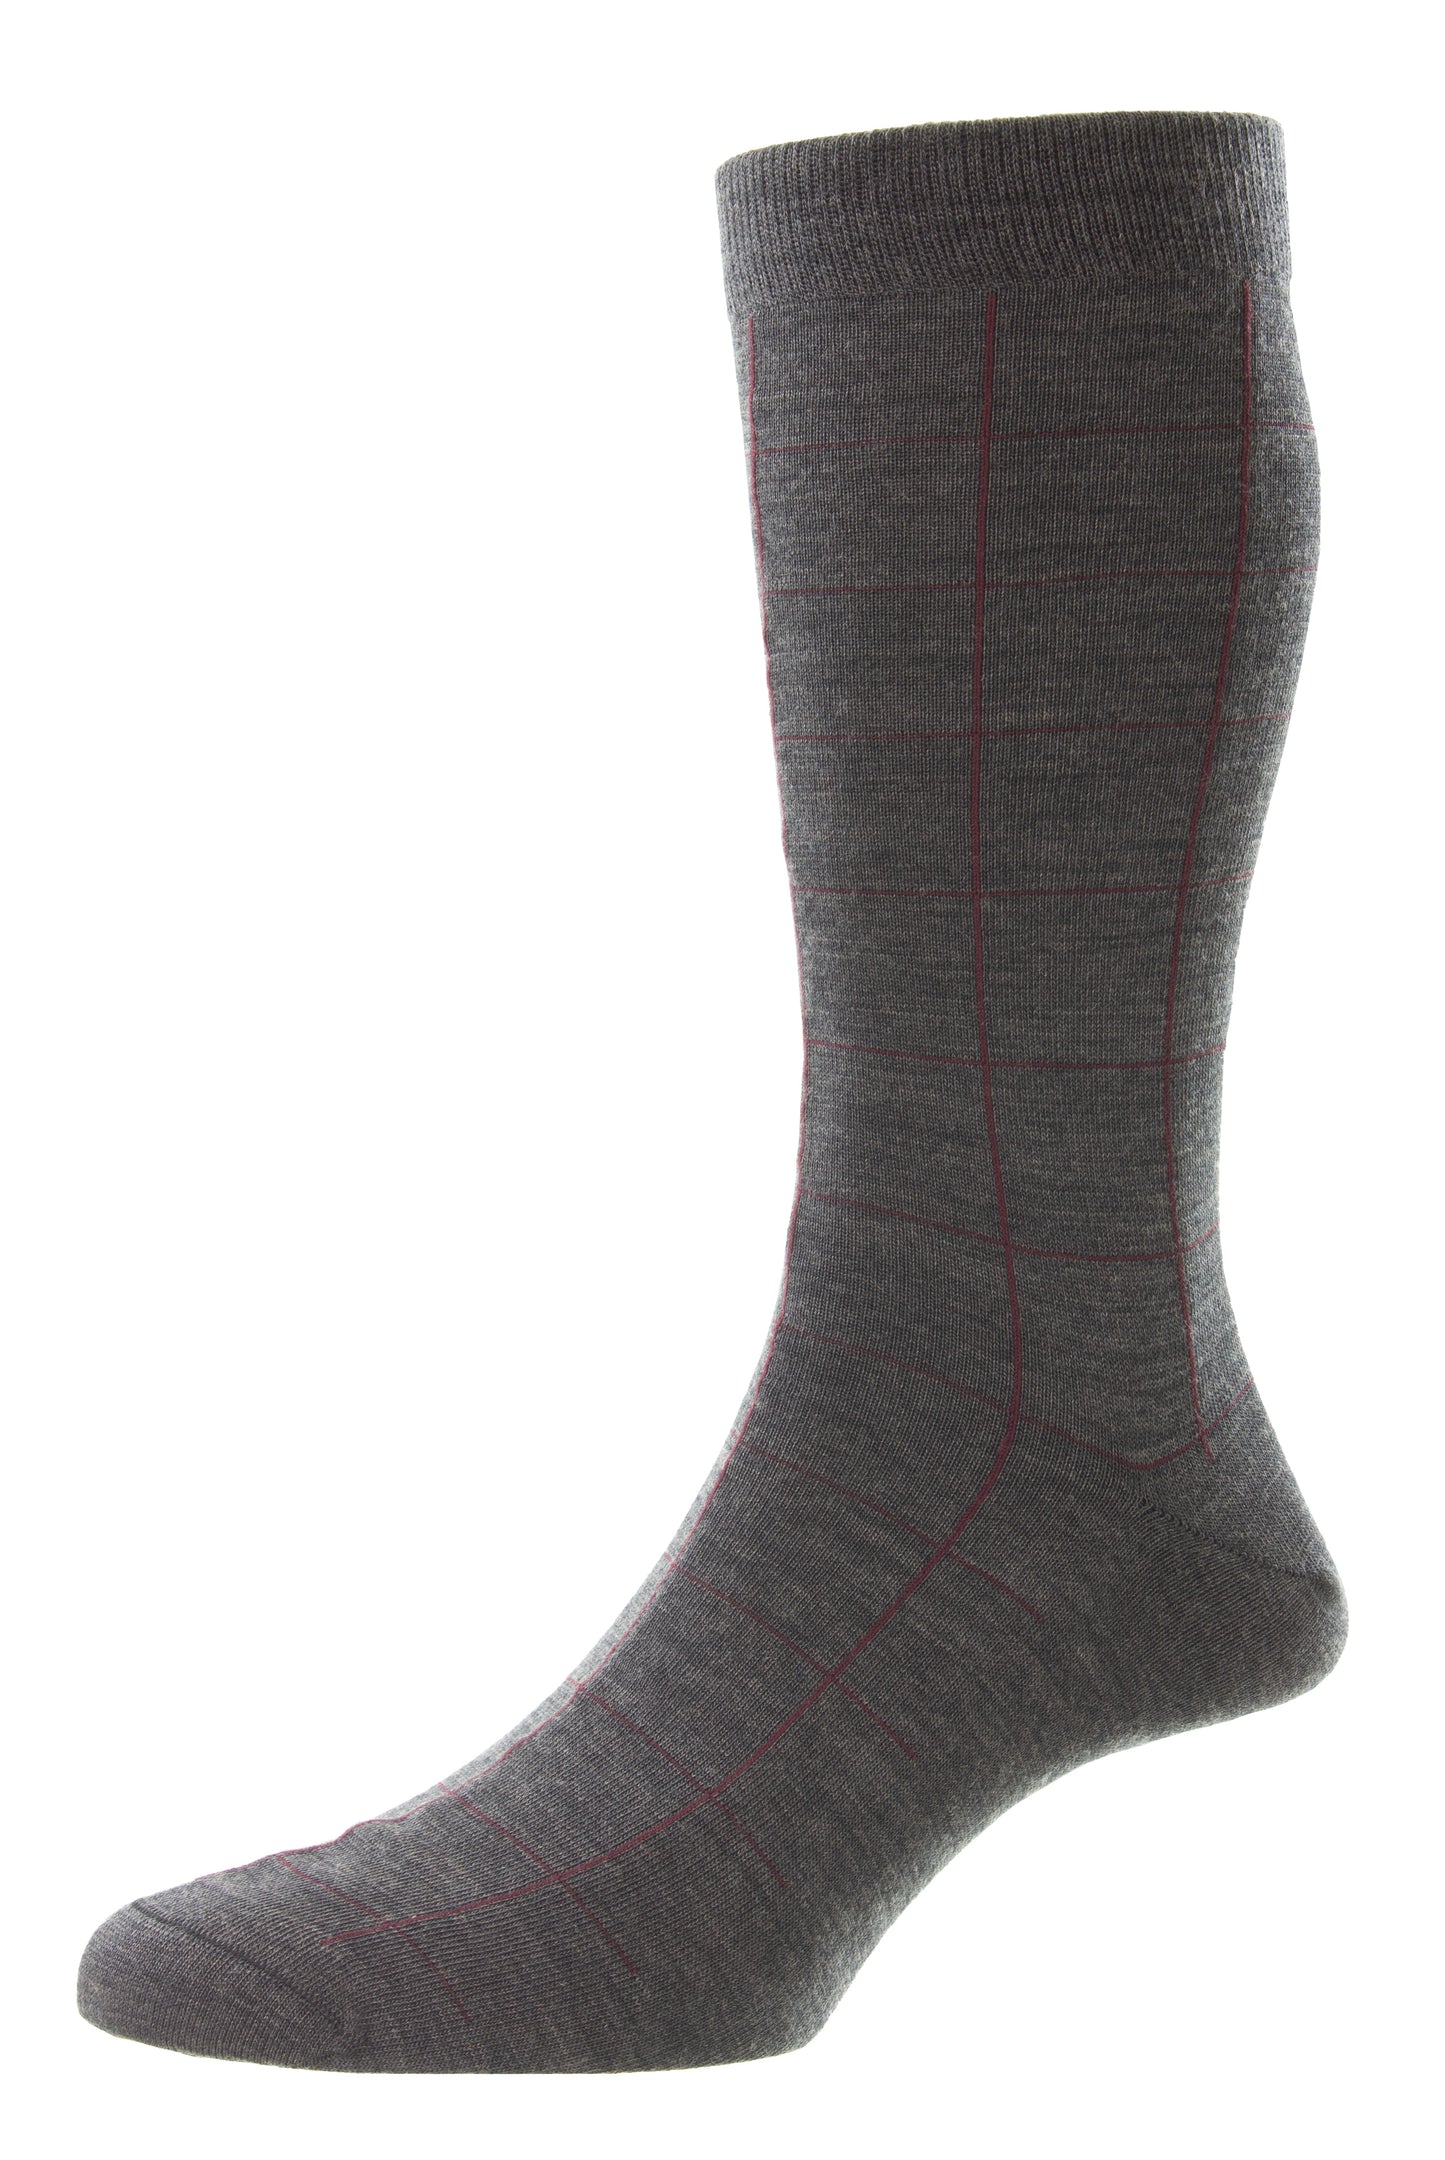 Vintage Collection "Westleigh" Sock